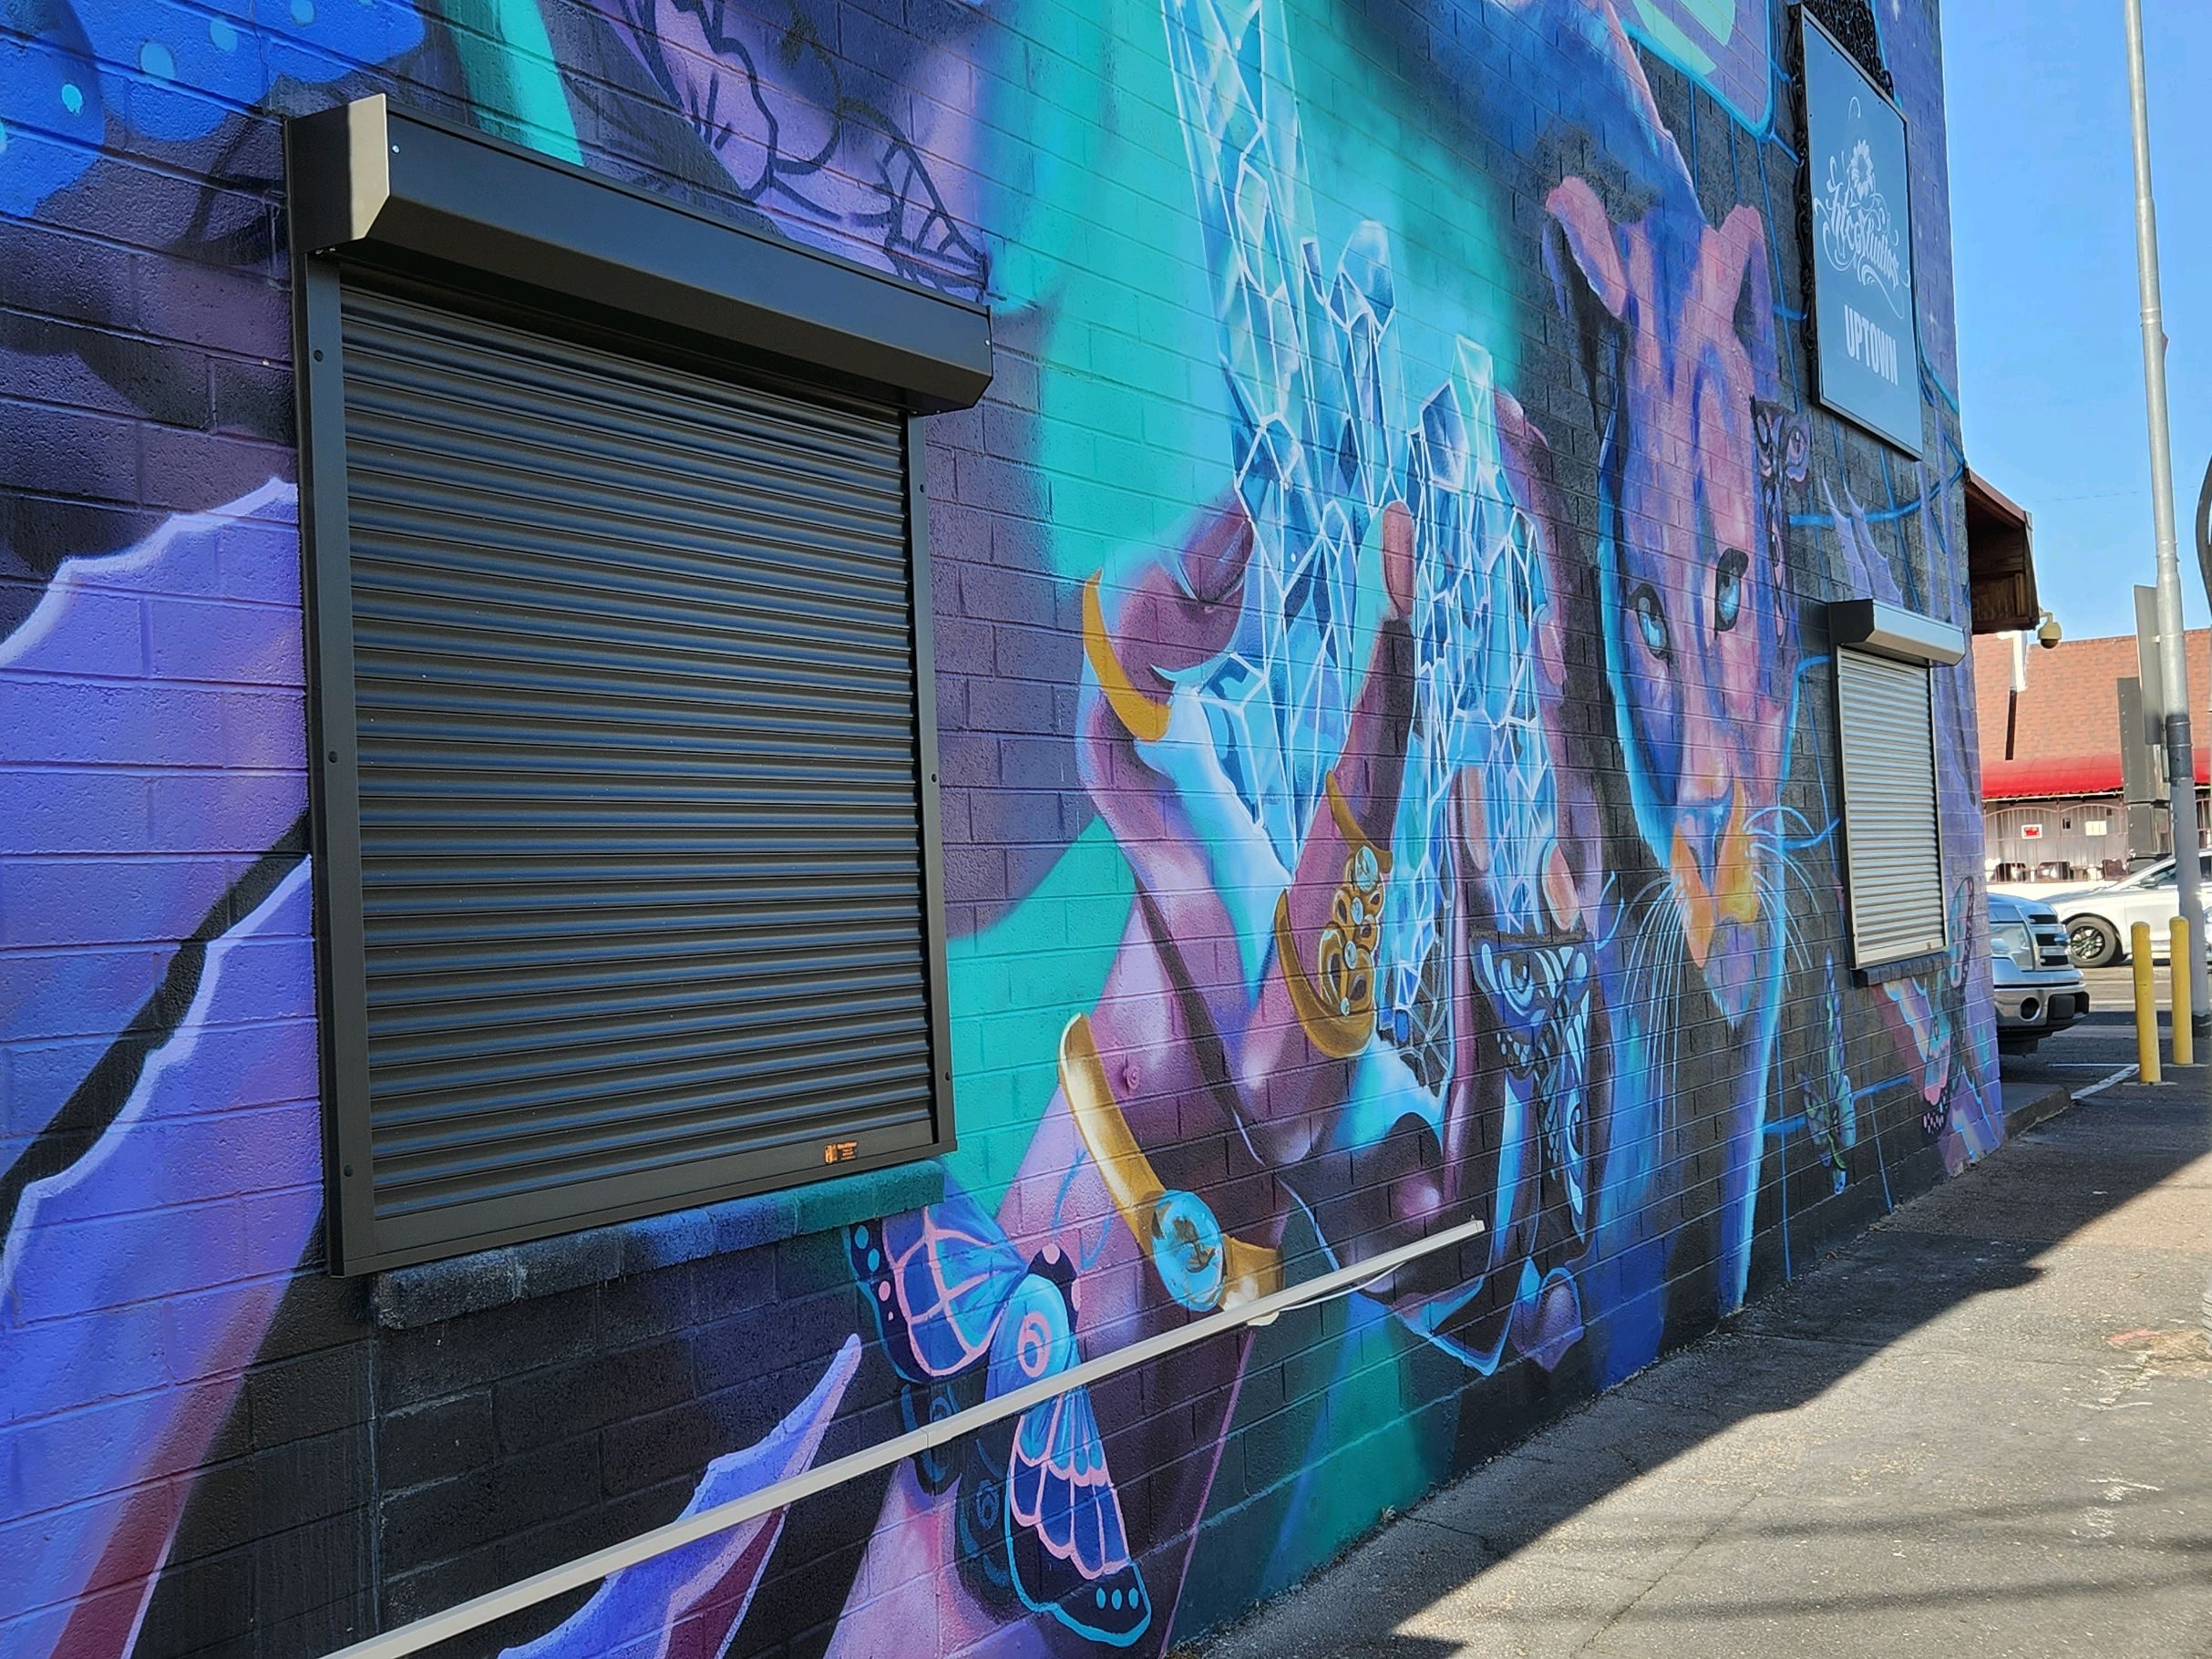 An image exterior rolling shutters outside of a commercial establishment with graffiti